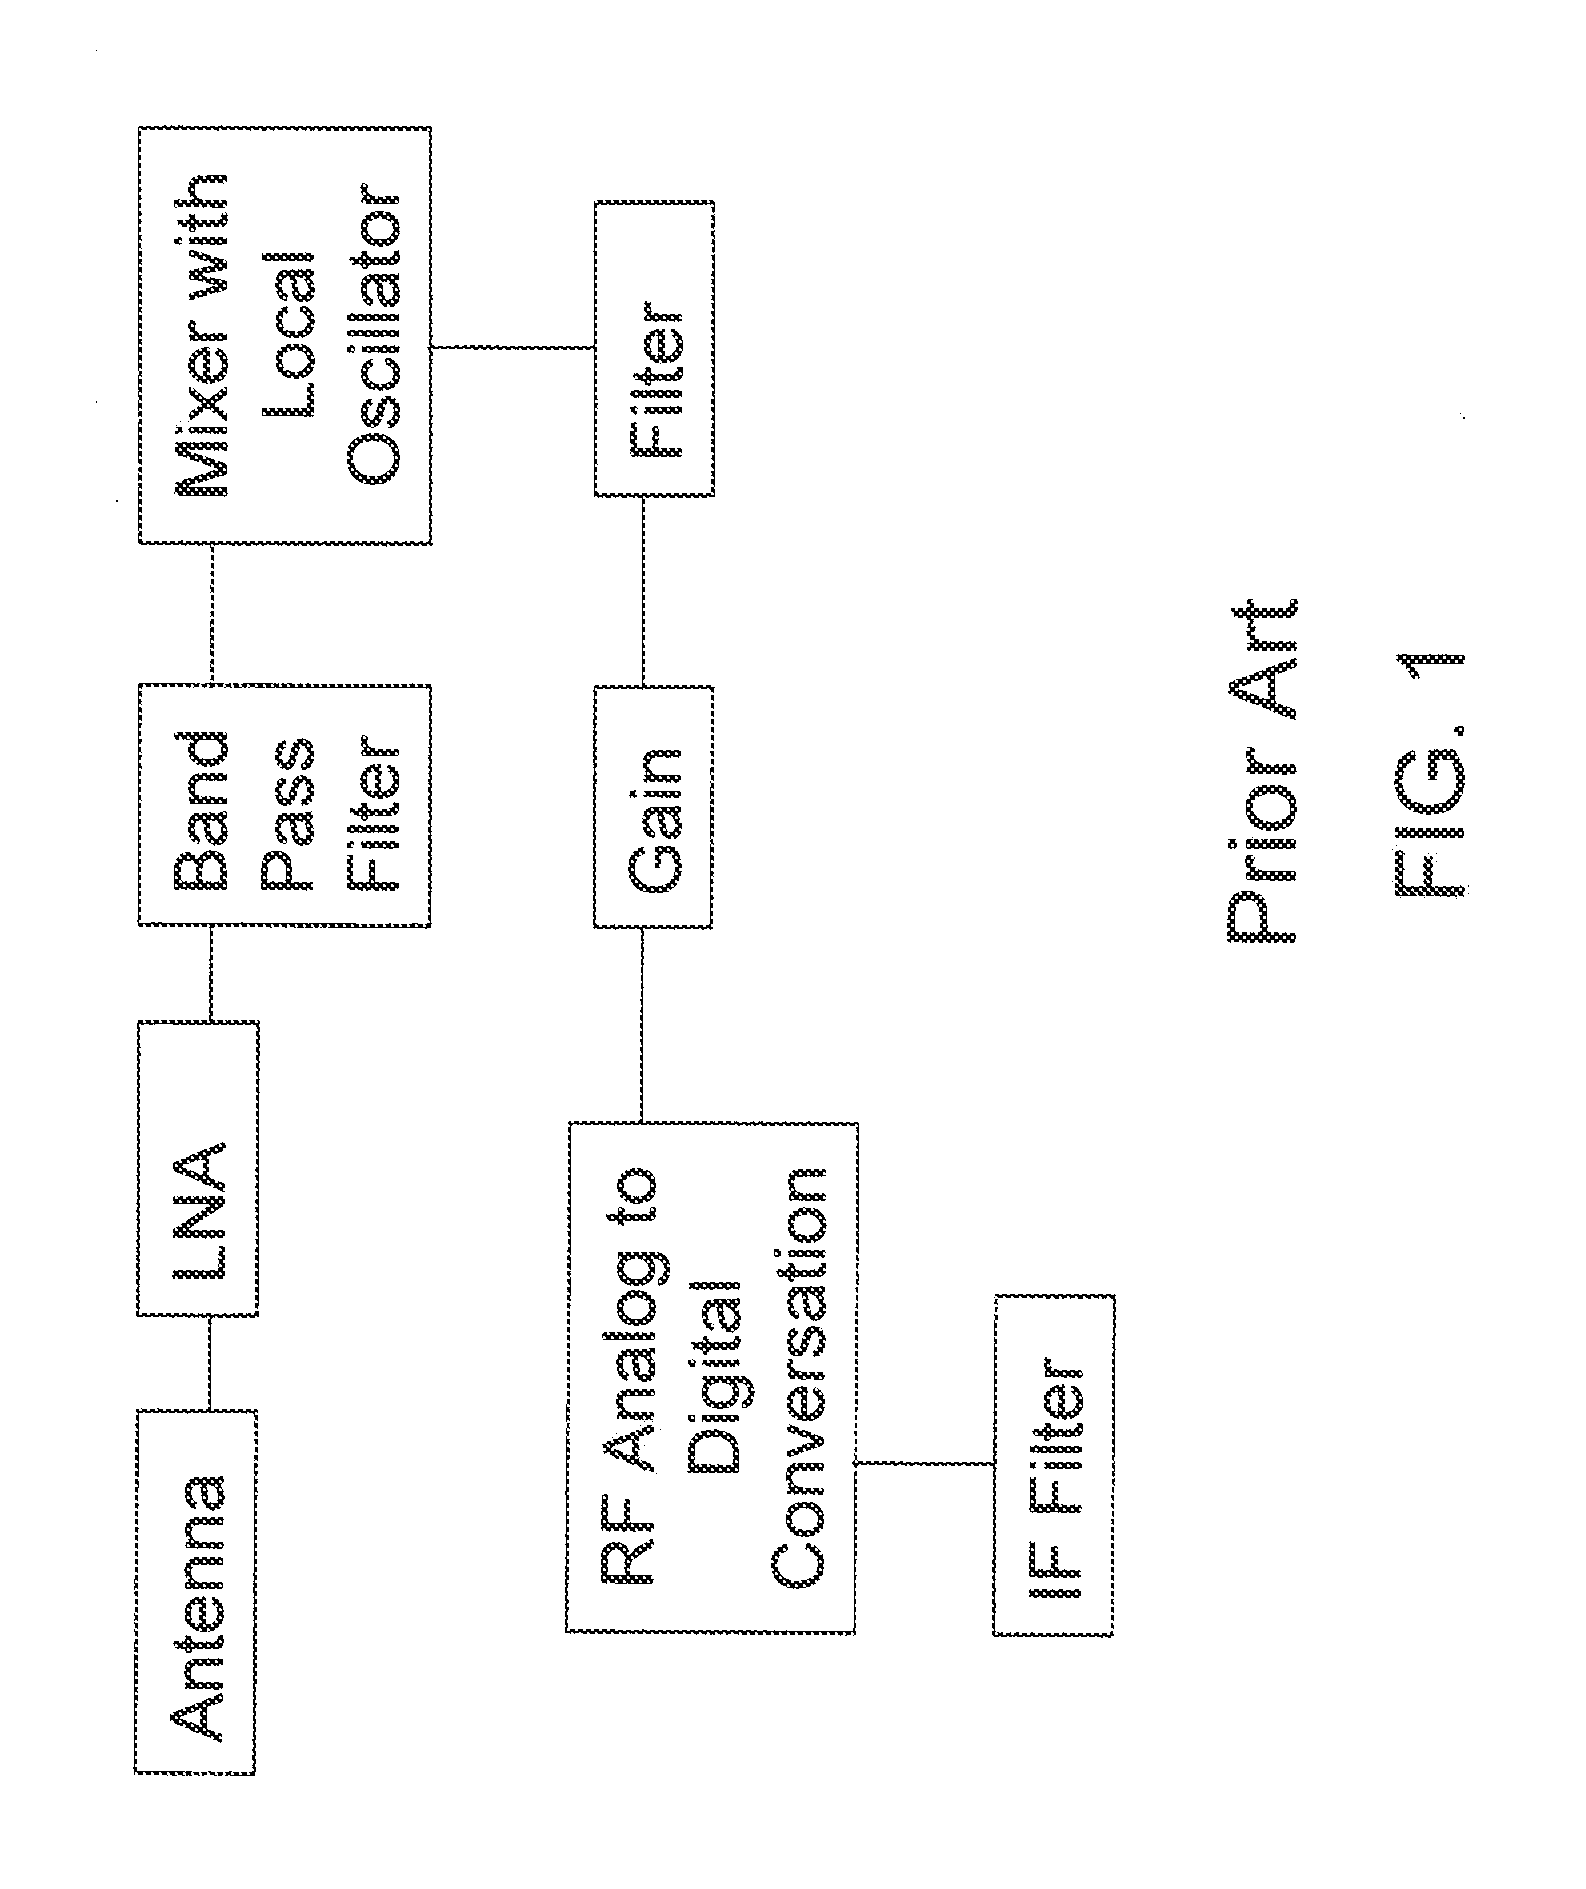 Method and apparatus for sensing inter-modulation to improve radio performance in single and dual tuner